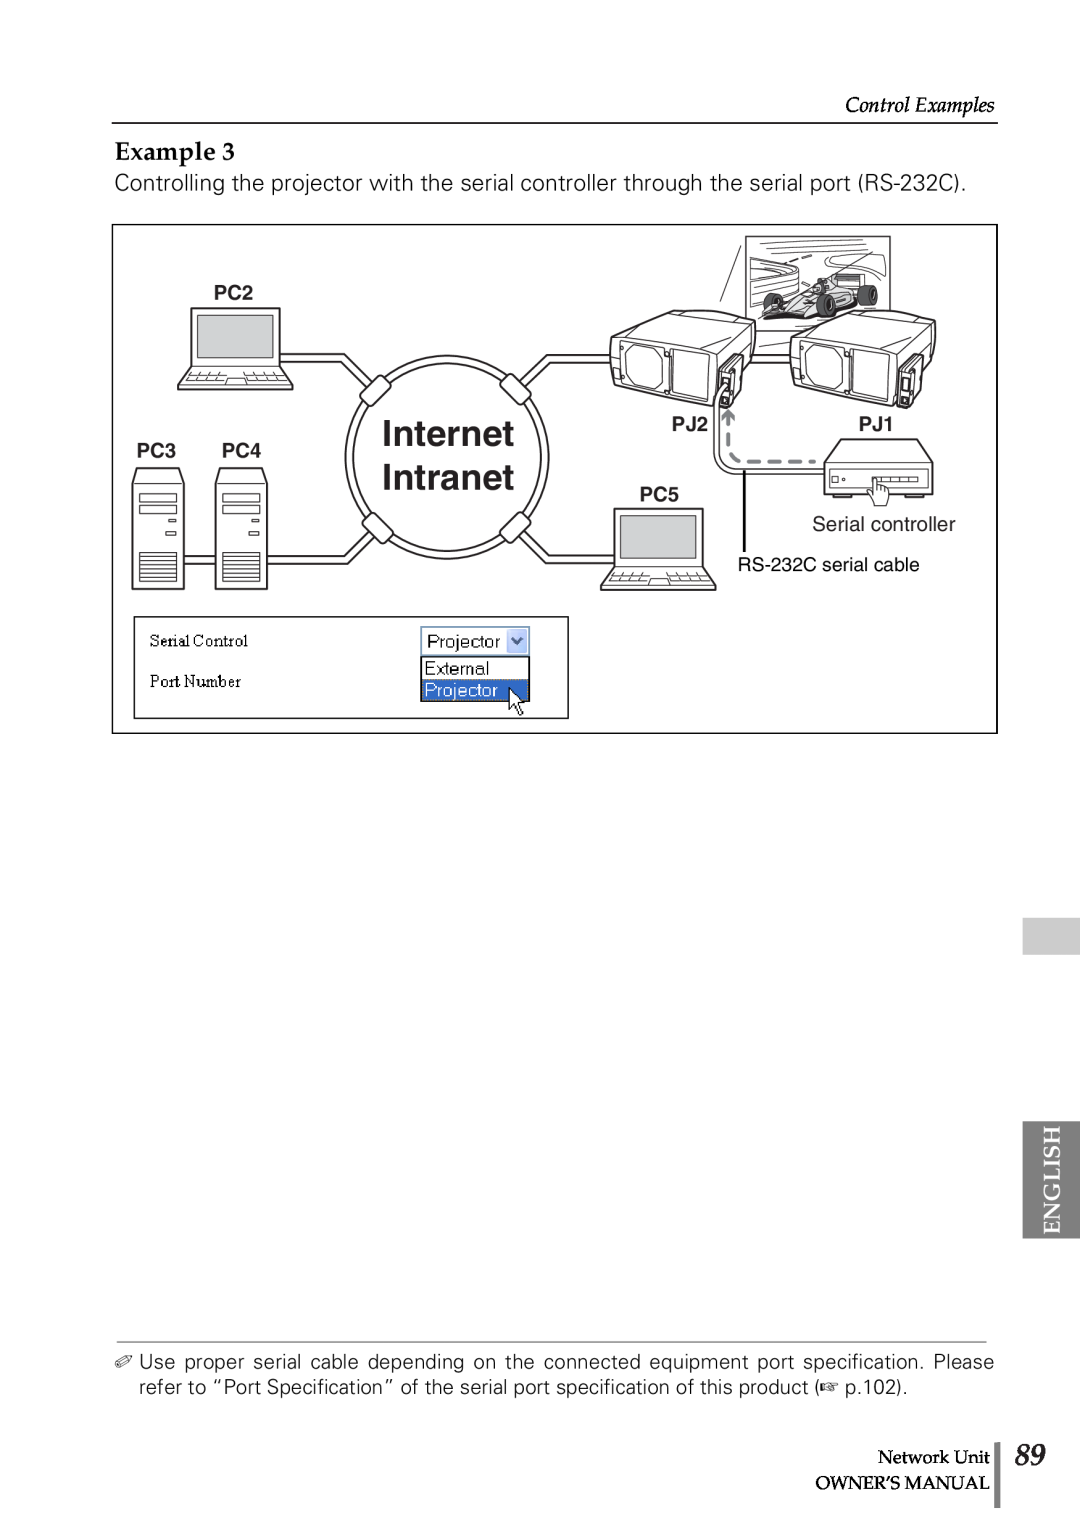 Sanyo POA-PN02 owner manual Internet, Intranet, English, Control Examples, RS-232C serial cable, Serial controller 